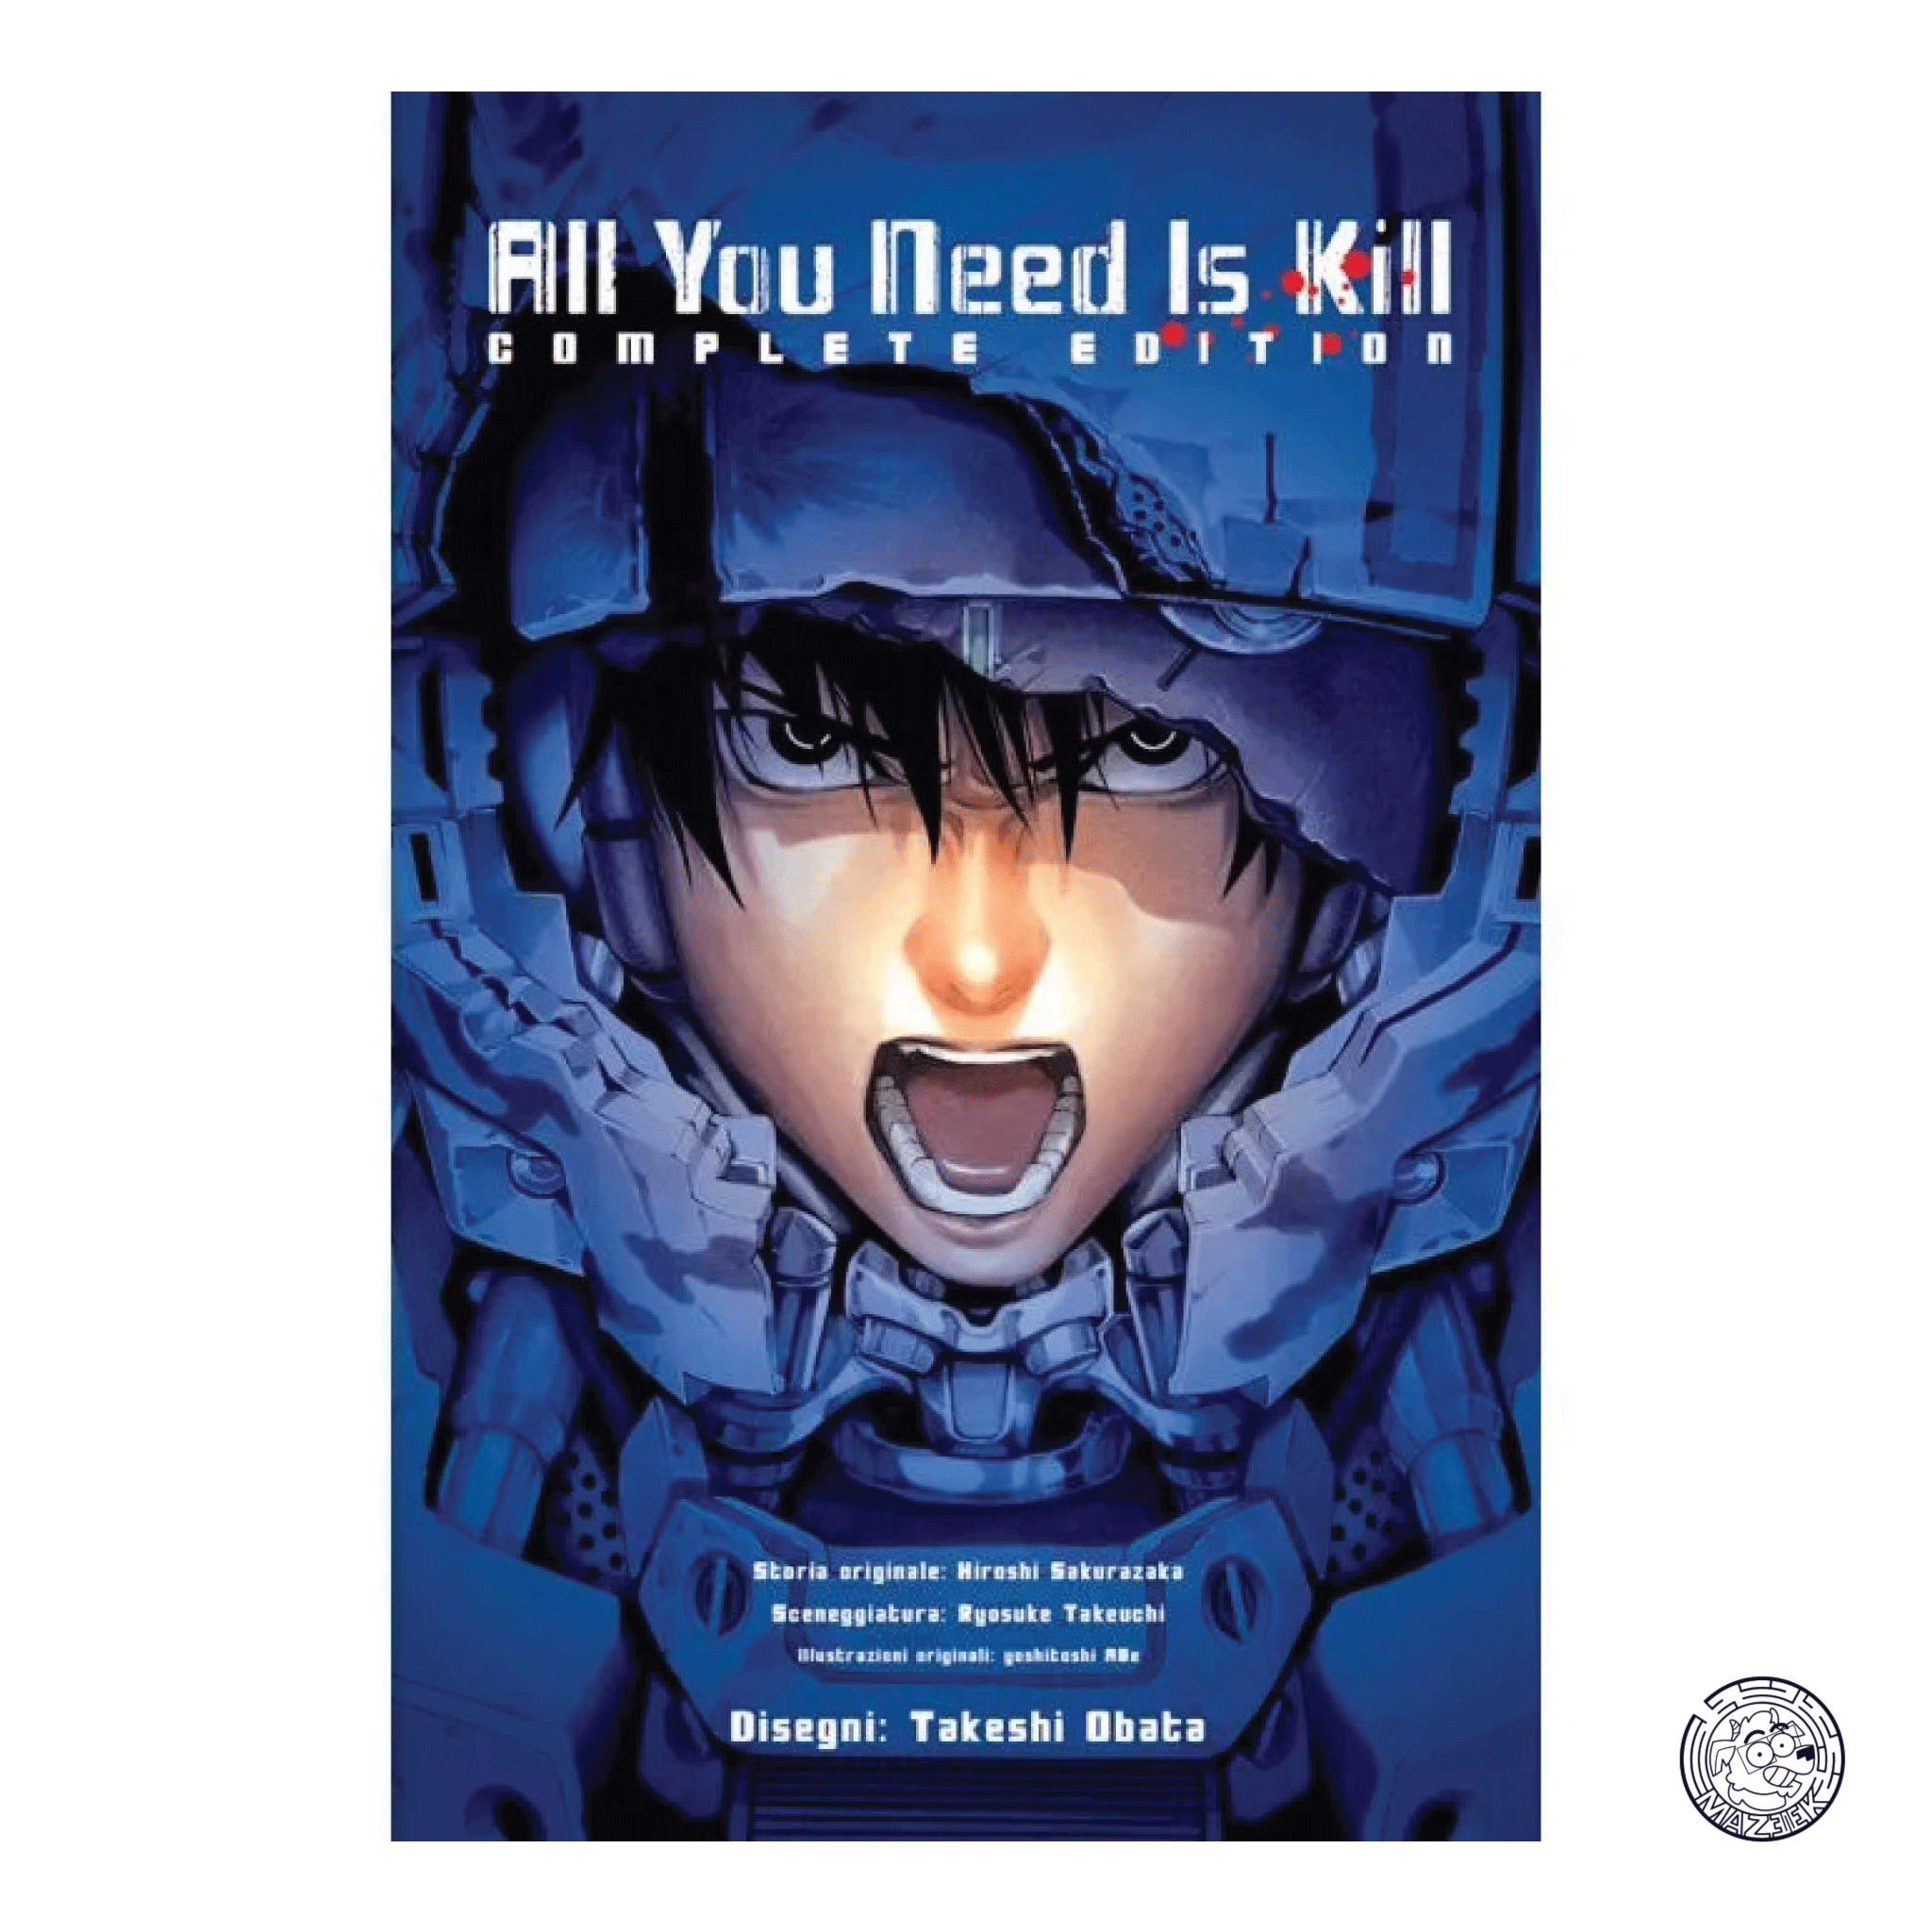 All you need is kill Complete Edition - Reprint 1